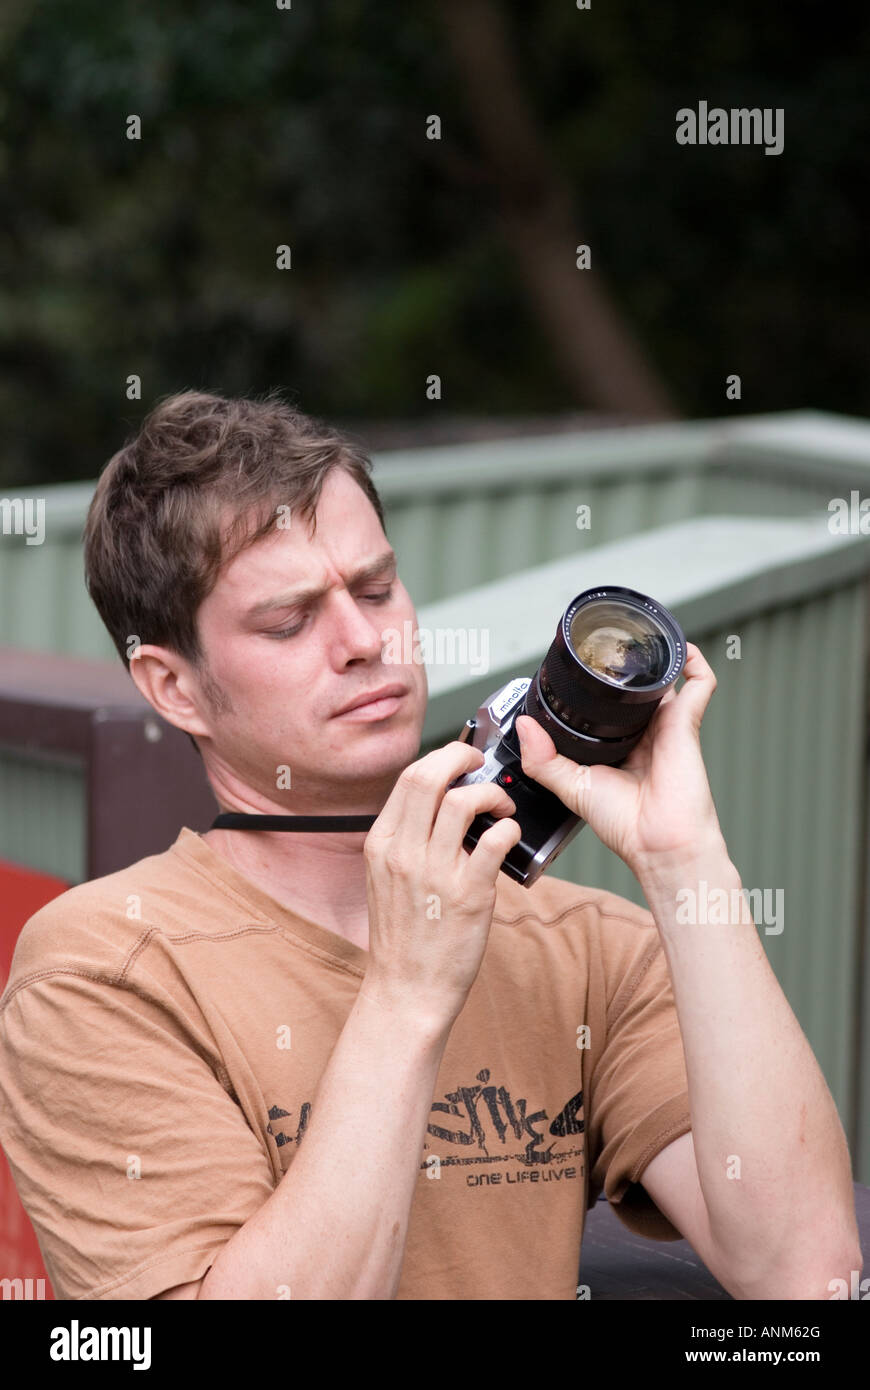 A young man changes the settings on his camera Stock Photo